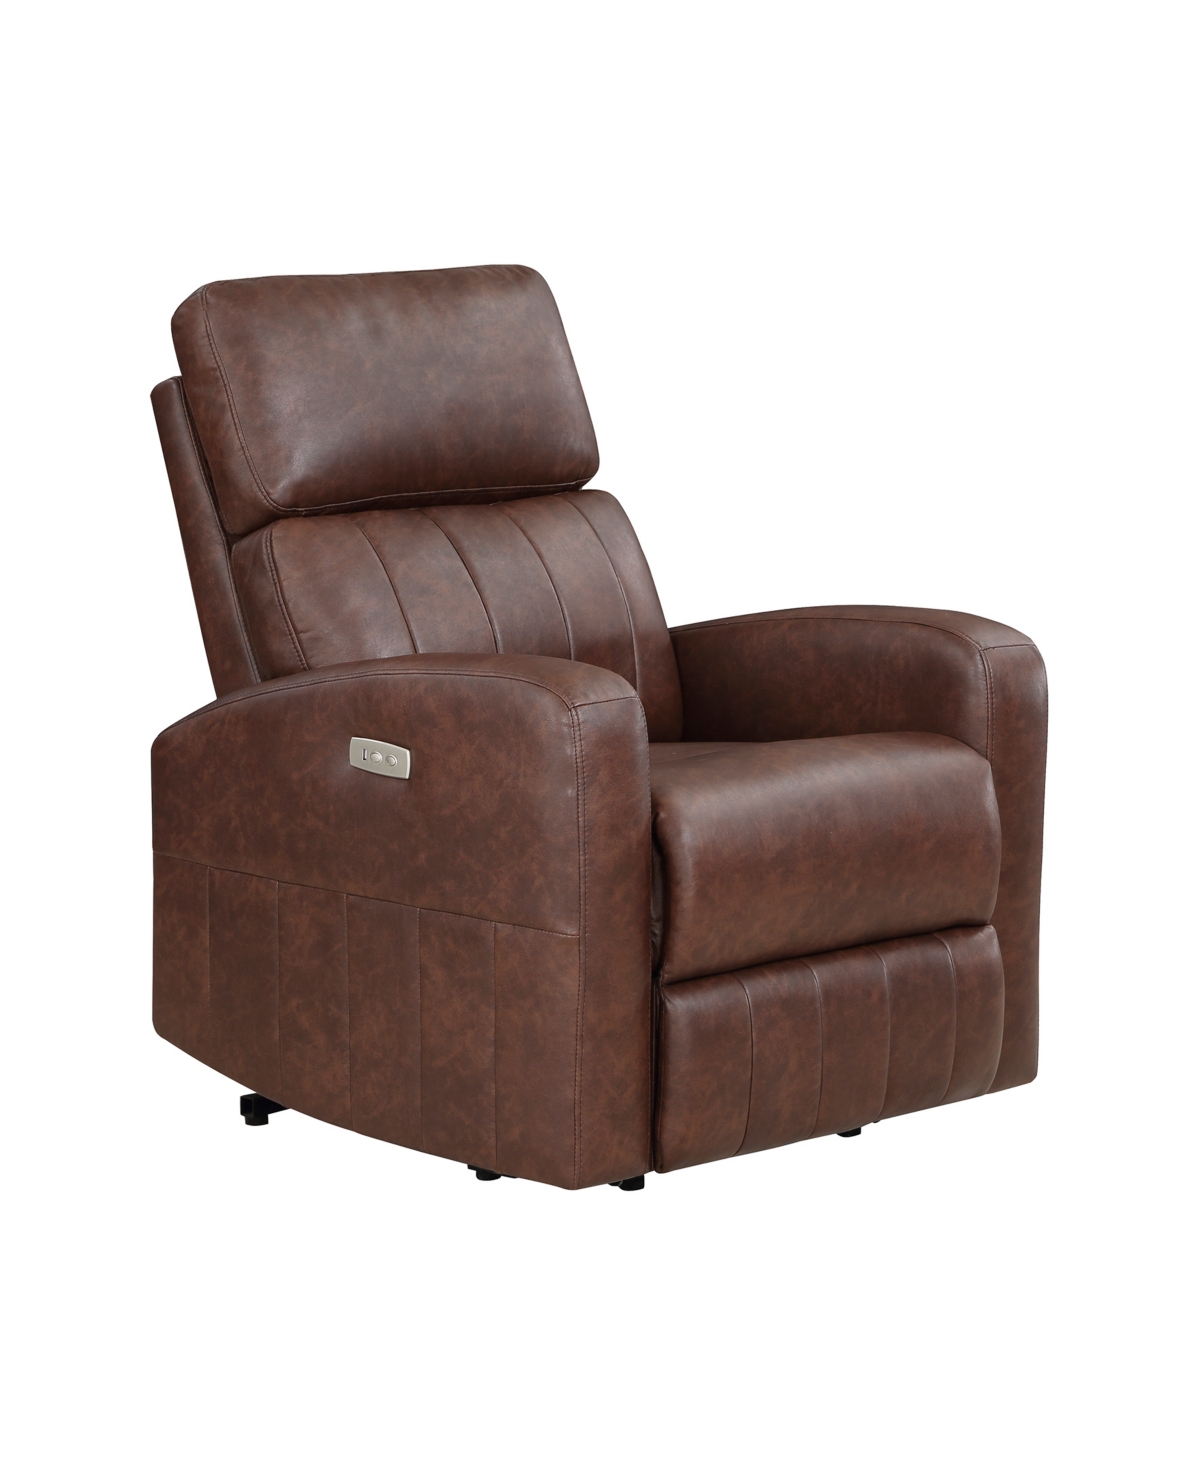 Homelegance White Label Crackle Power Lift Chair In Brown